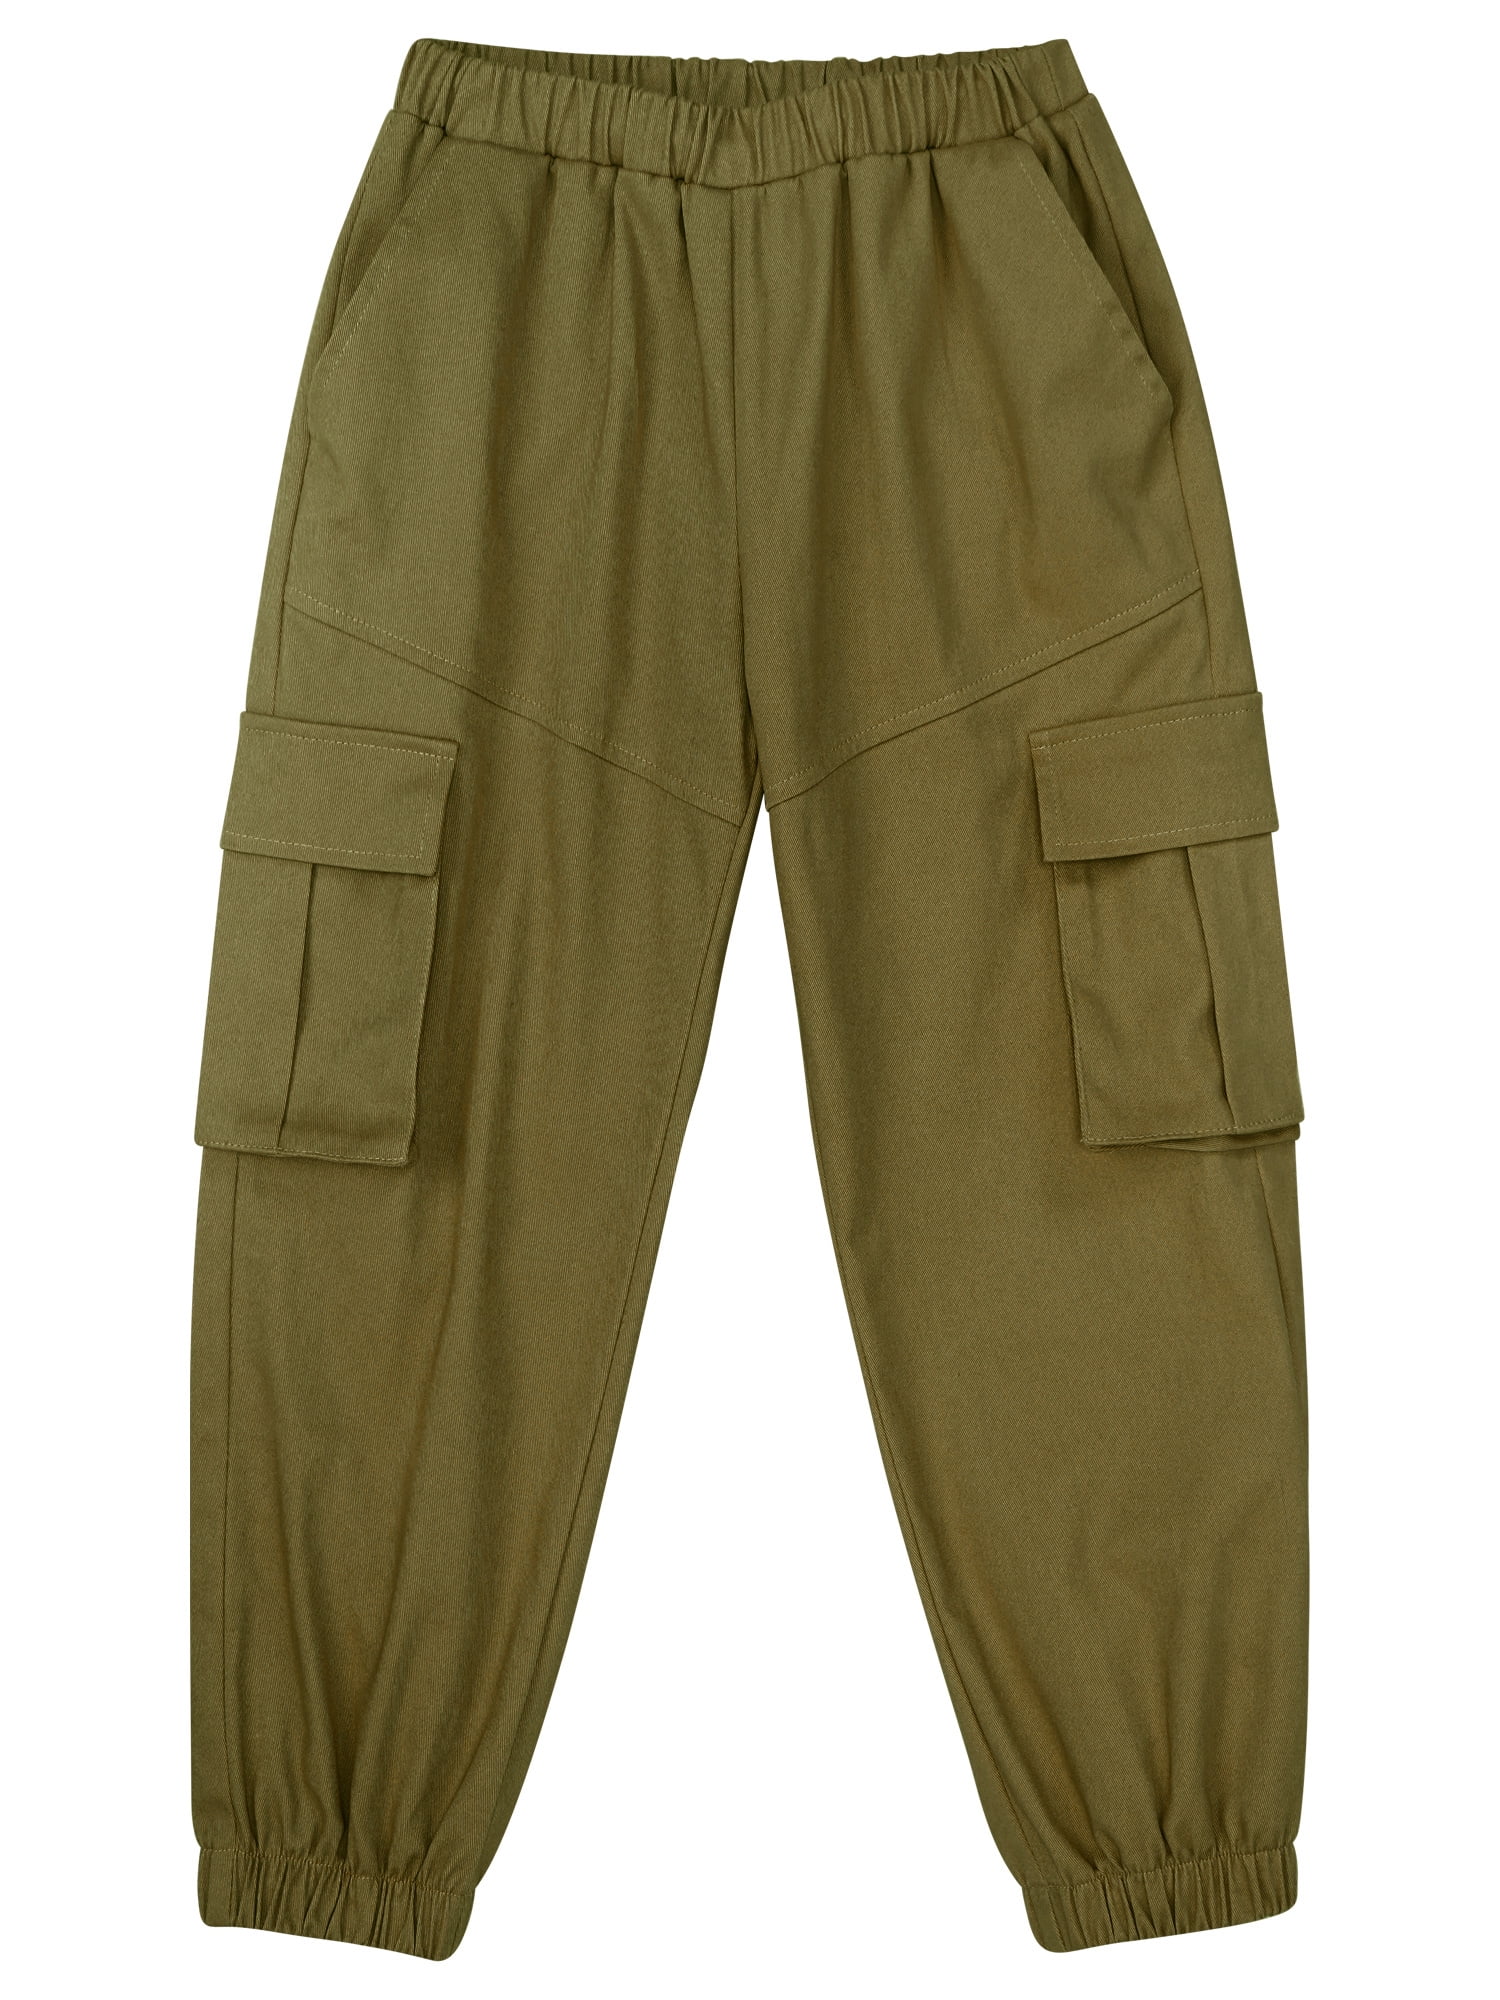 Boys 6-14 Pants,Sizes Dungarees Moisture-Wicking Army Cargo Casual Green 14 Kids YiZYiF